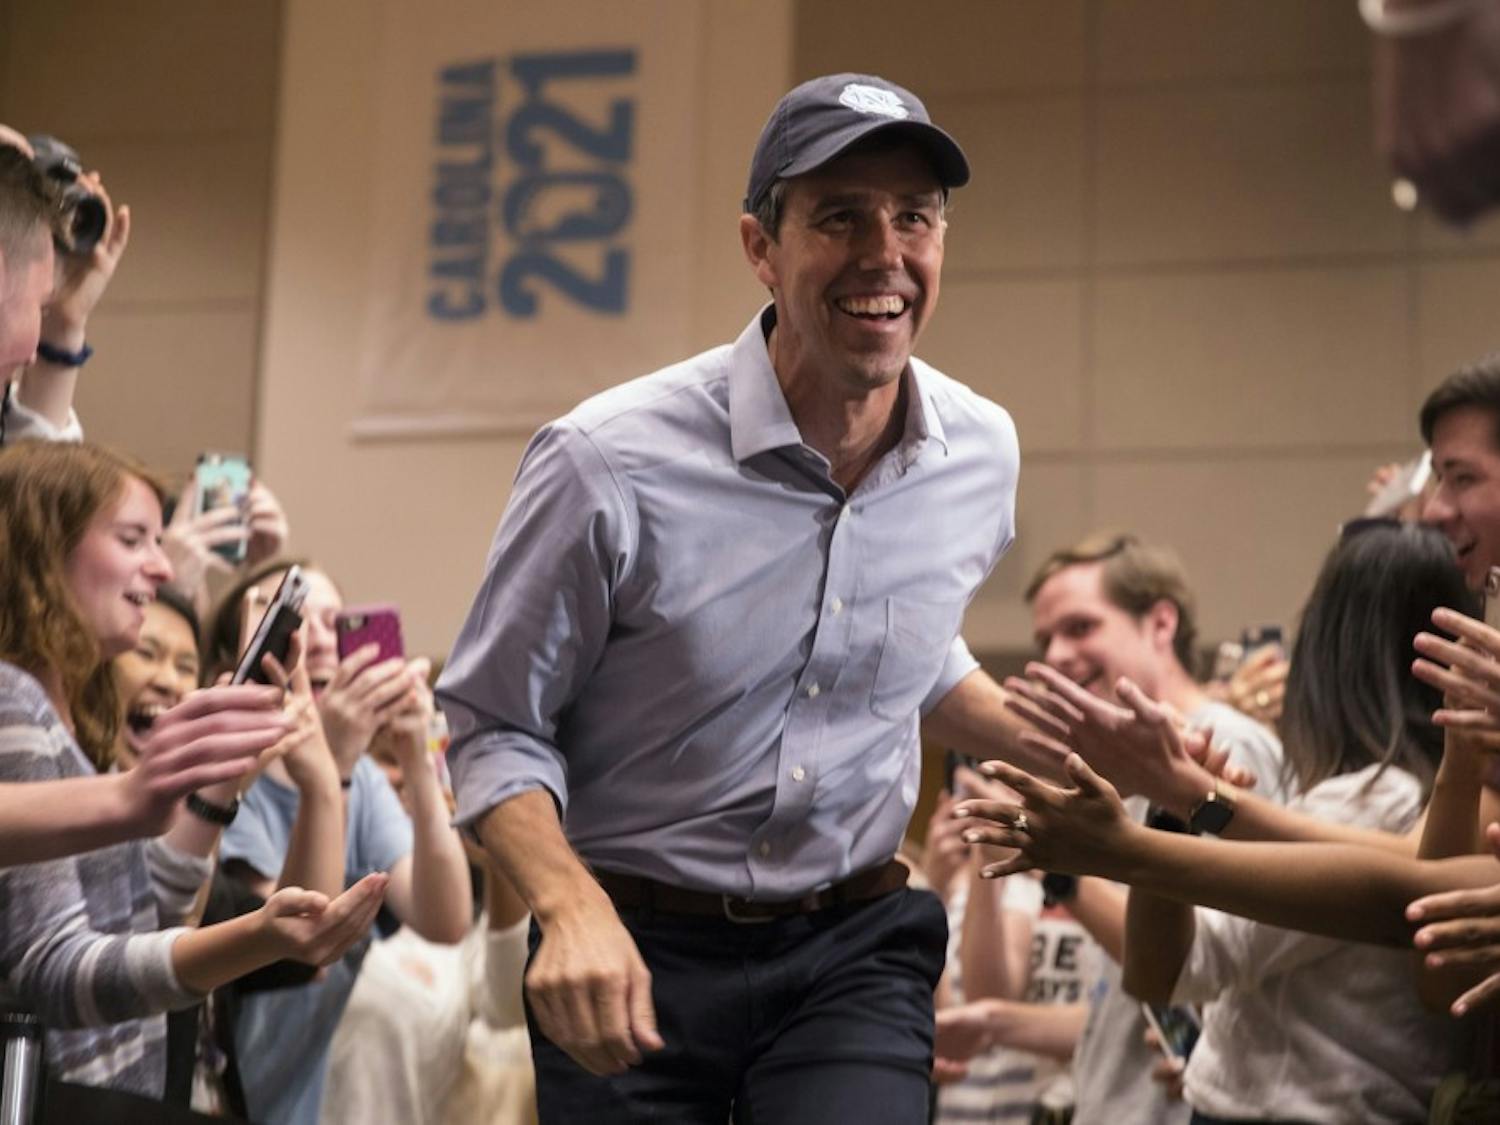 Democratic presidential candidate Beto O'Rourke visits UNC-Chapel Hill on Monday, April 15, 2019 in the Great Hall of the Student Union. 